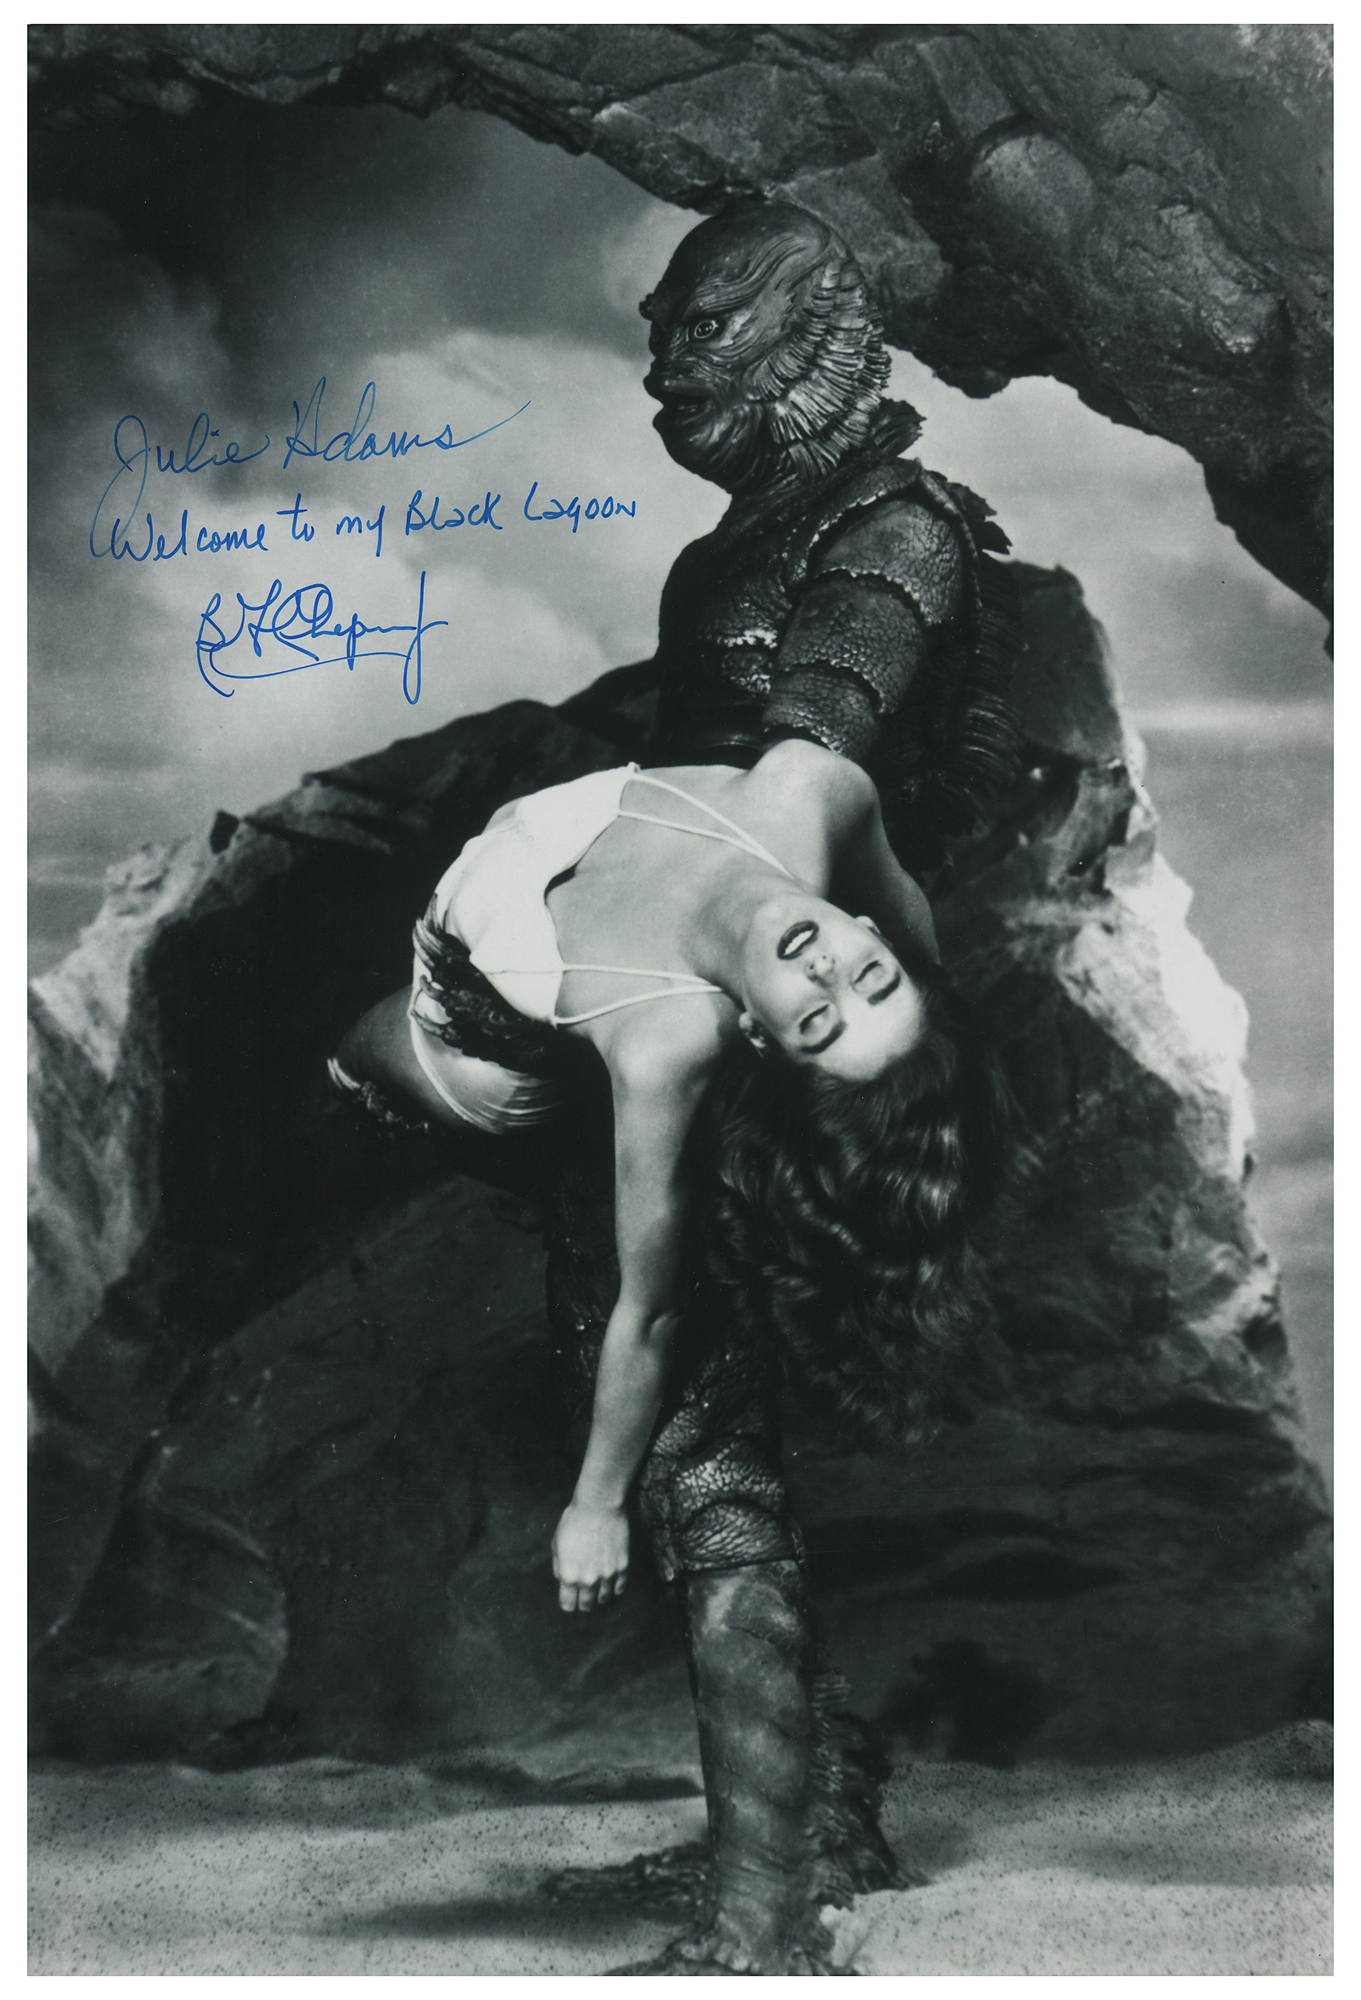 Lot #5459 Creature From the Black Lagoon: Adams and Chapman Signed Photograph